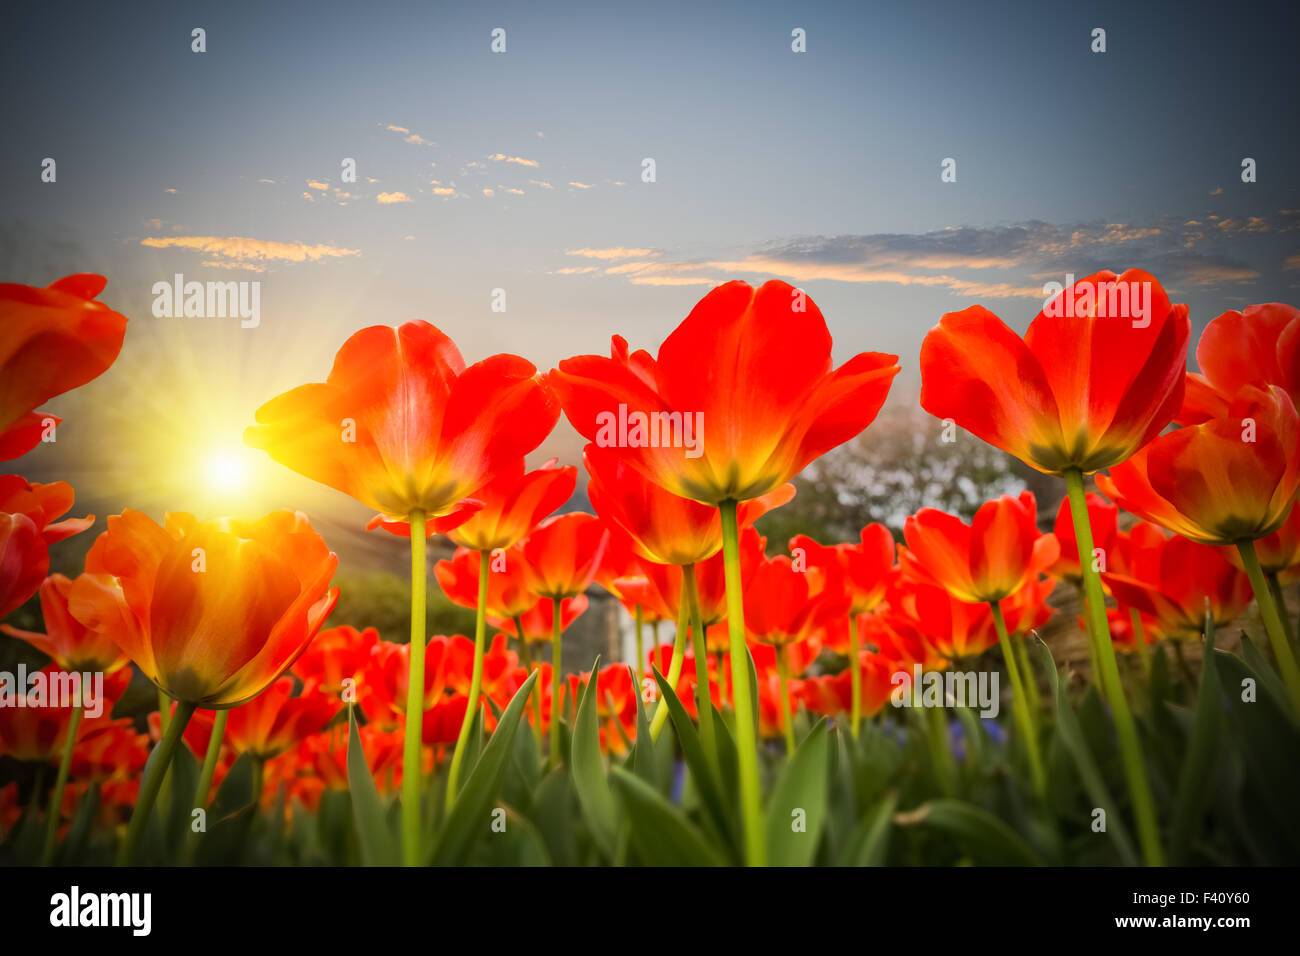 red tulips against a dusk sky Stock Photo